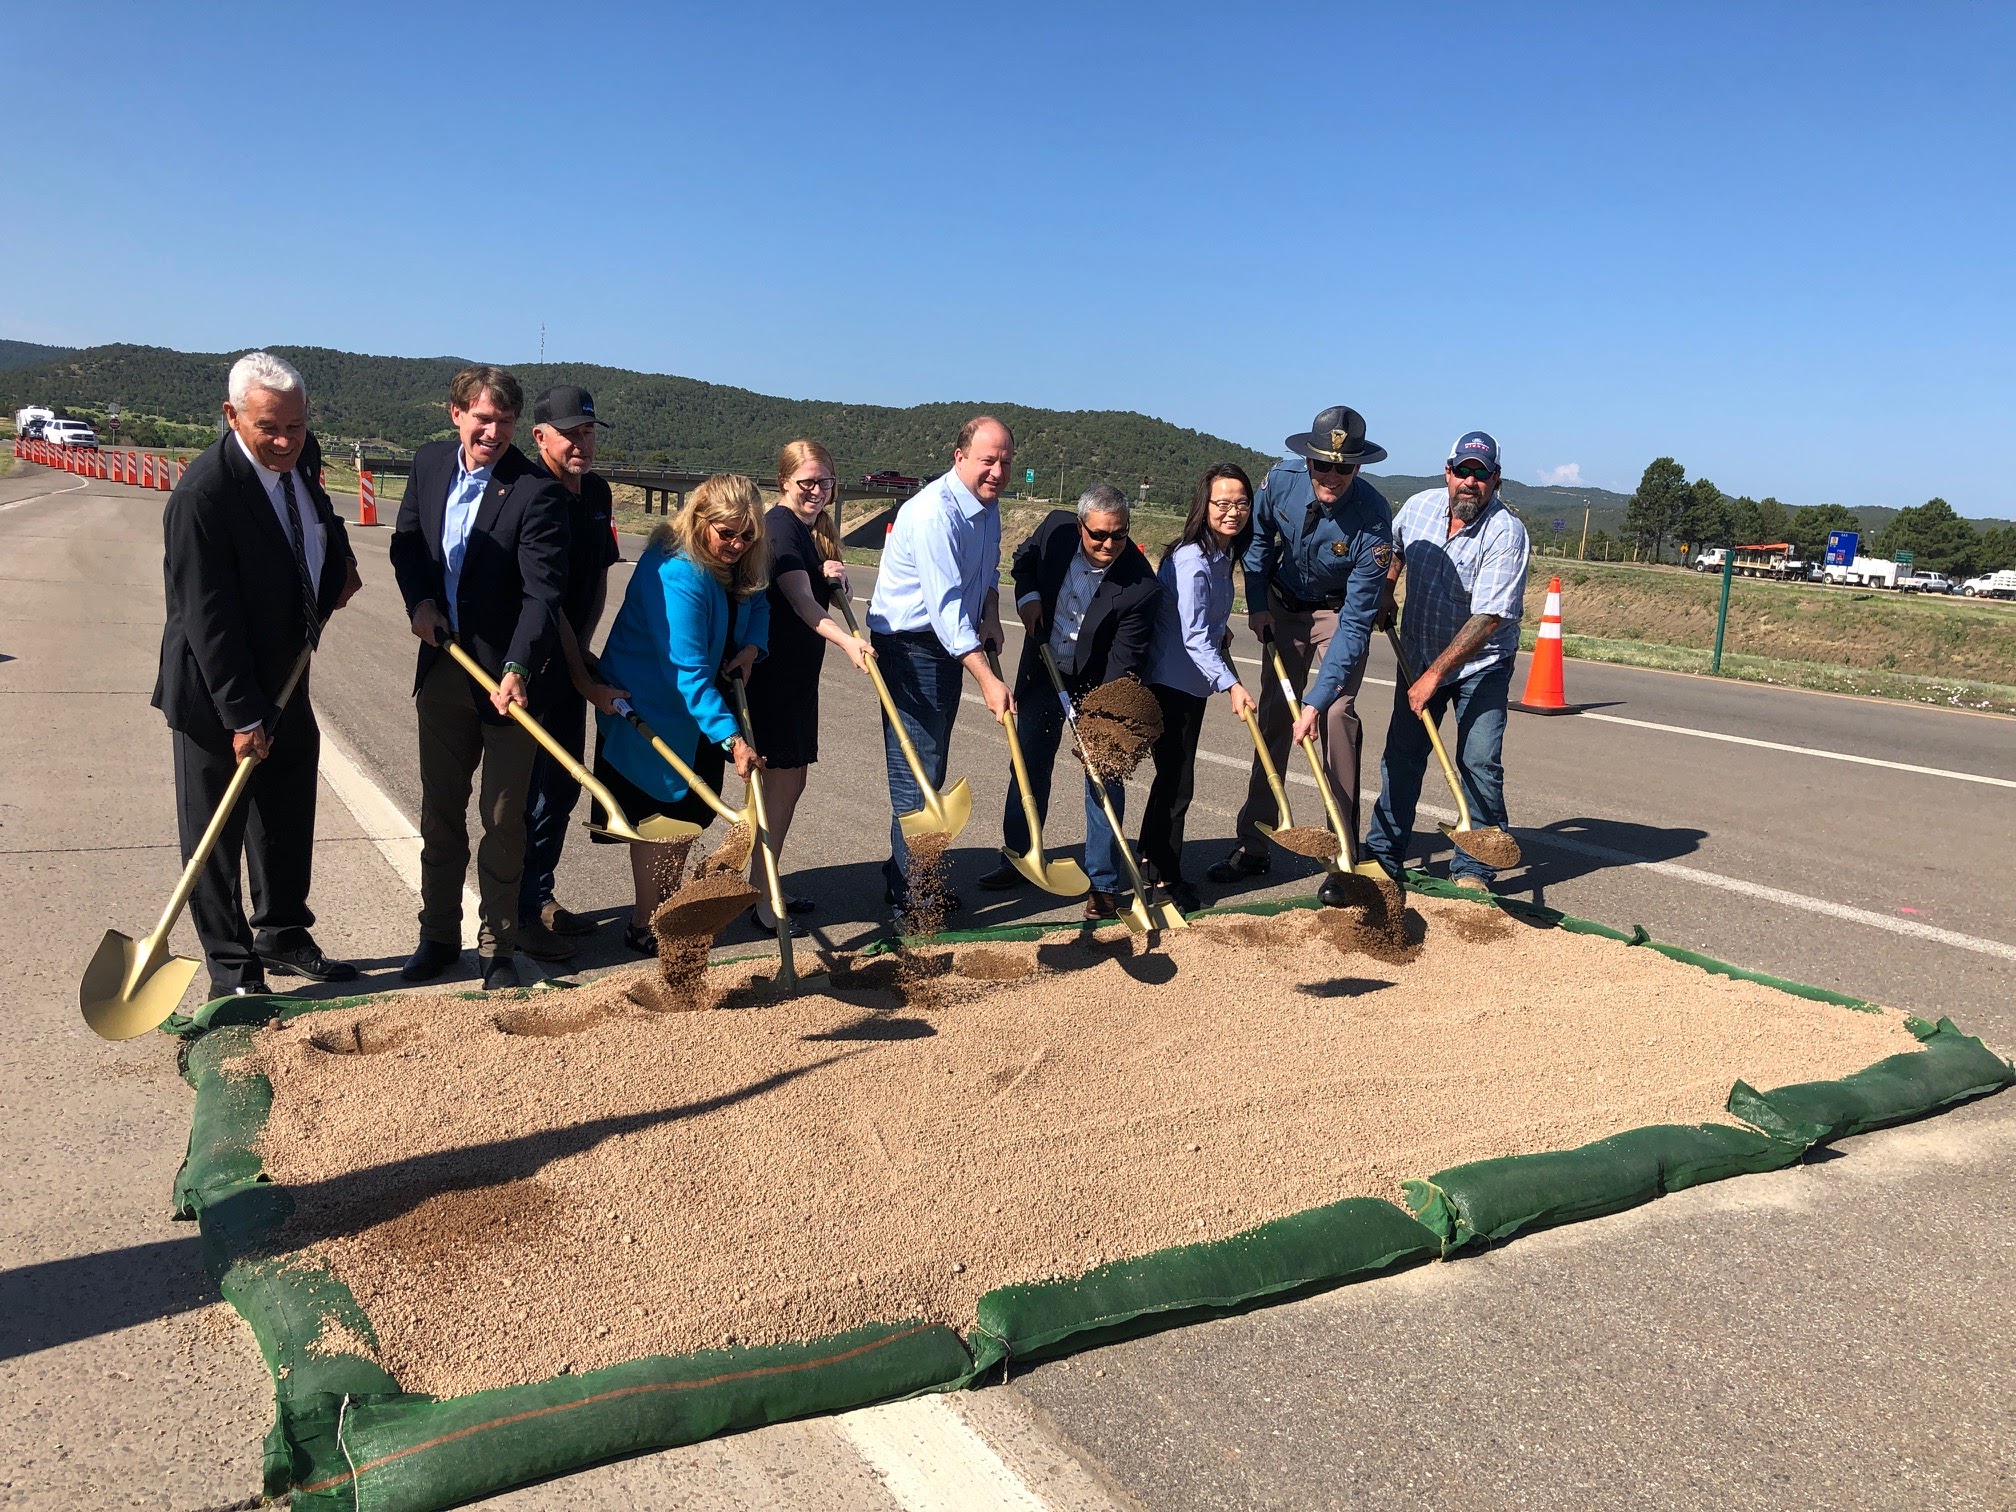 Elected officials at groundbreaking for the I-25/Exit 11 Interchange Improvement project detail image